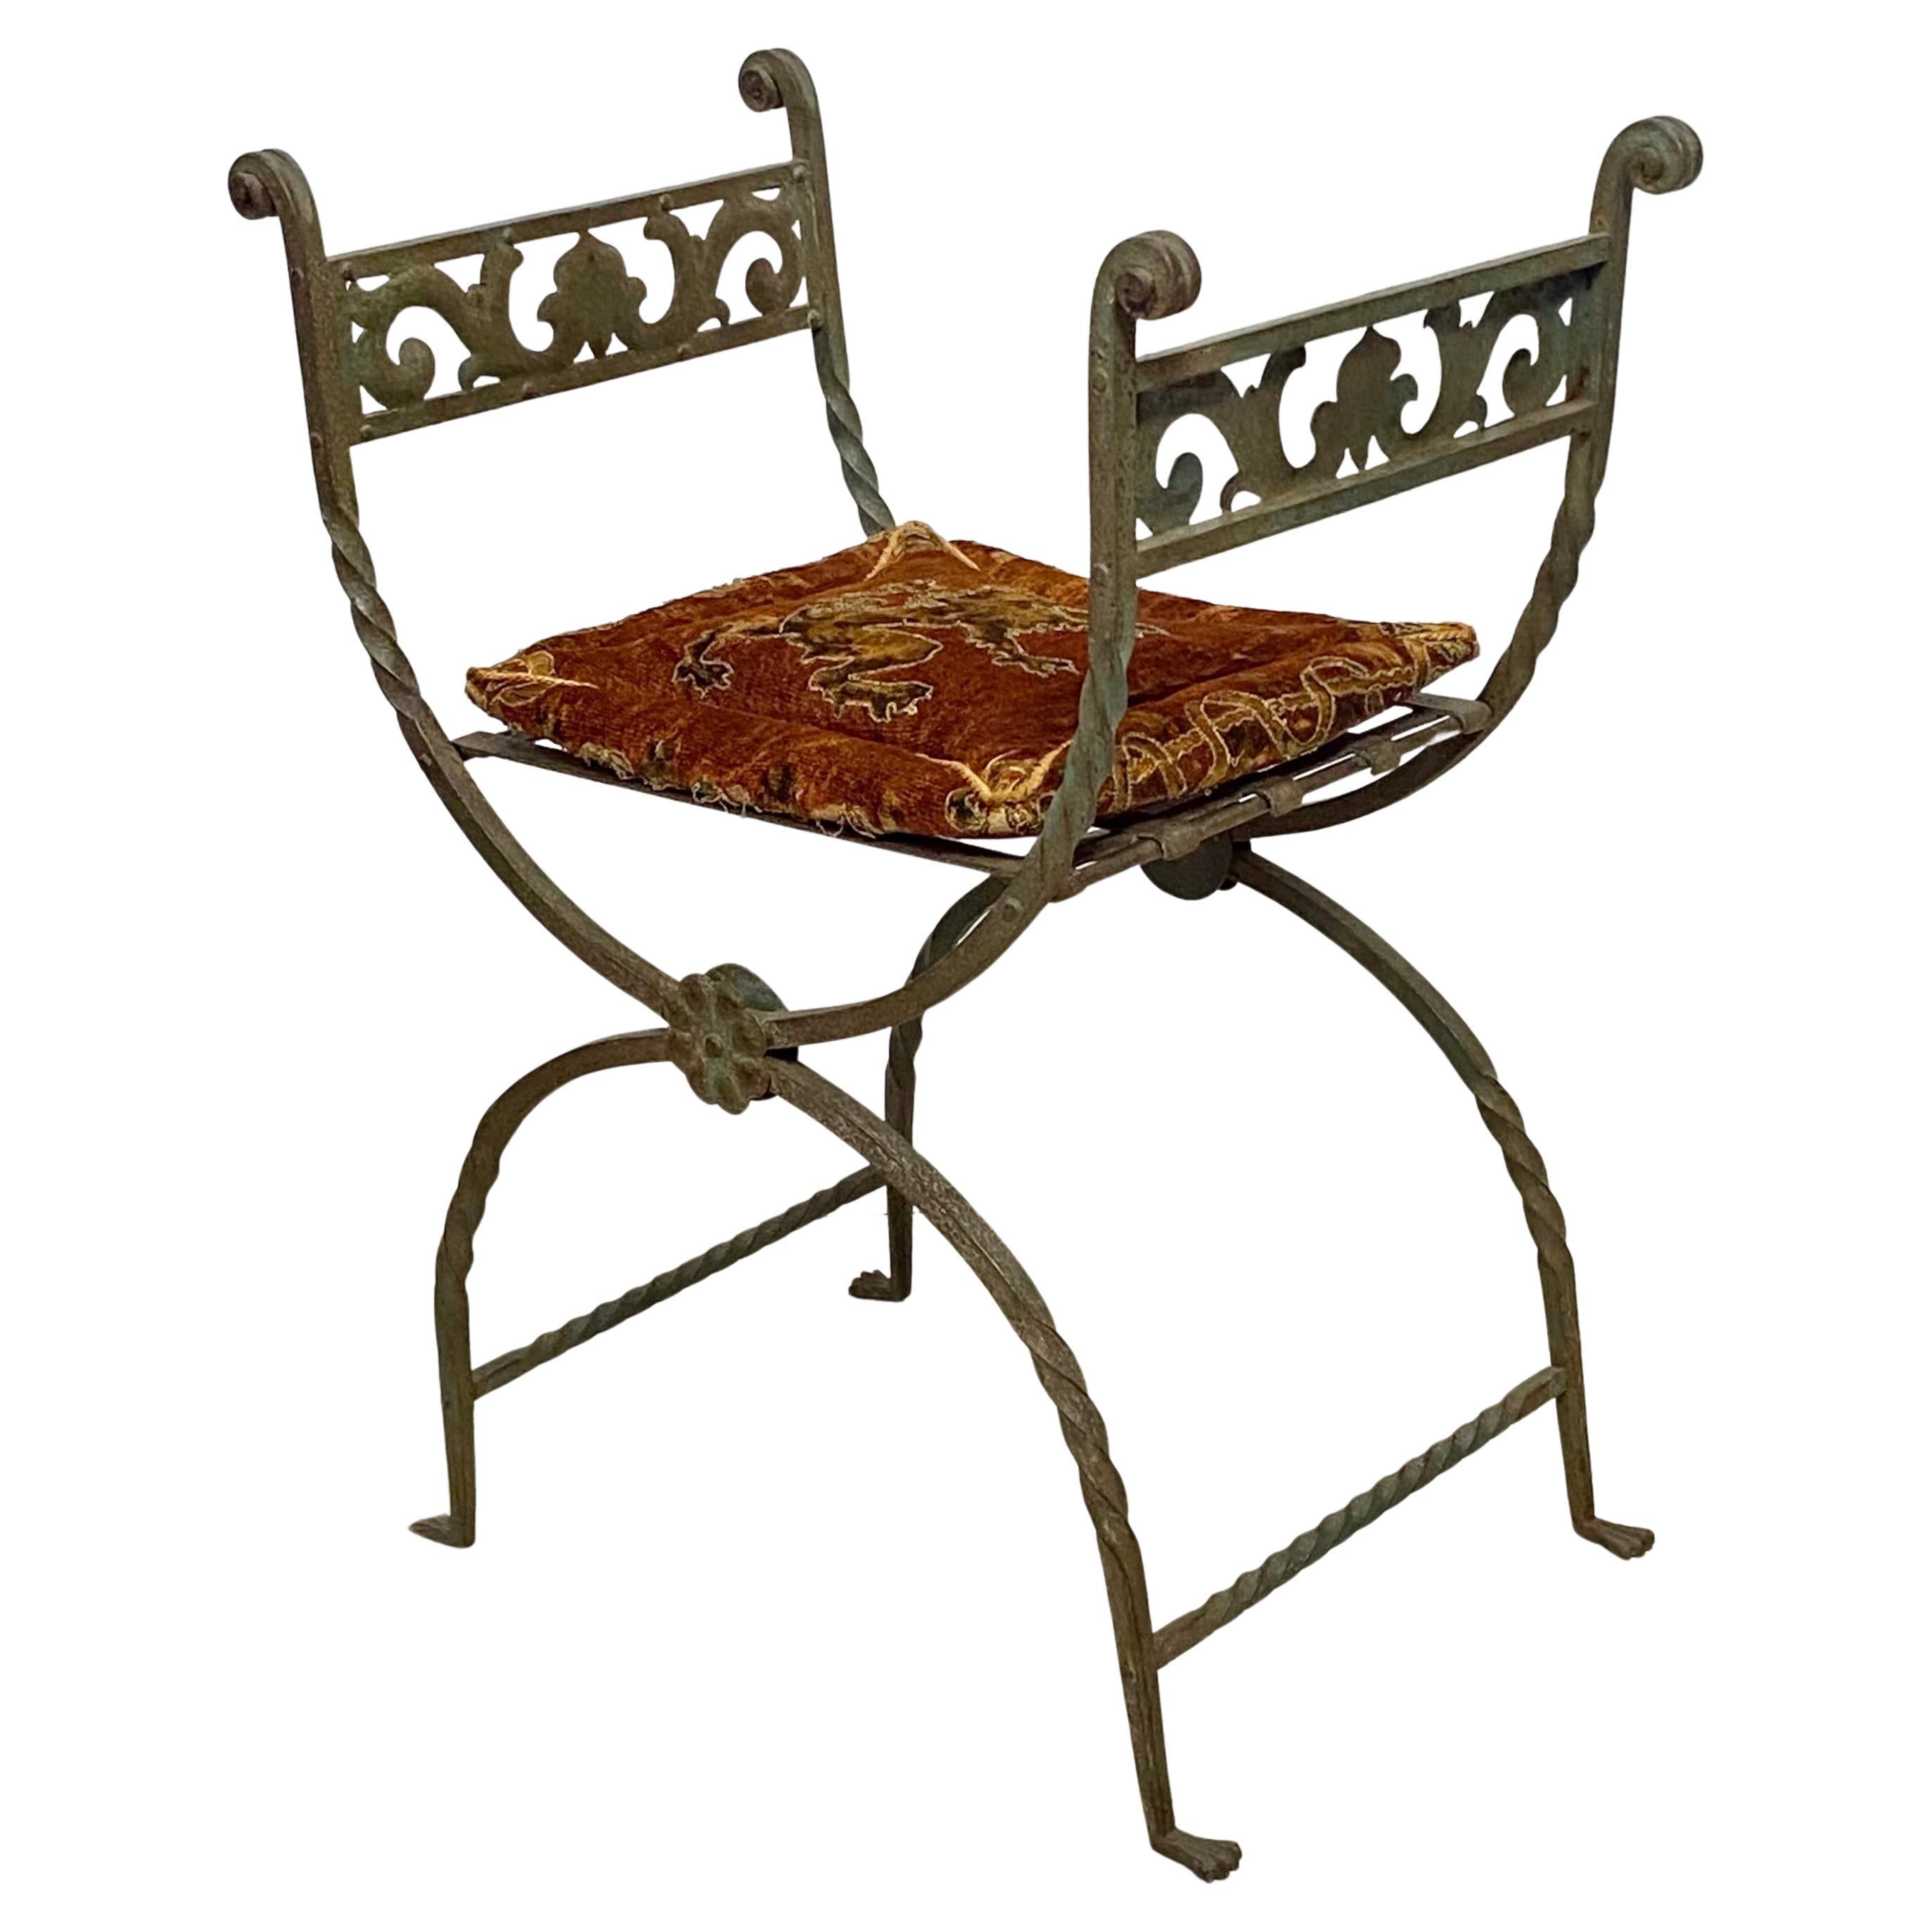 Antique Italian Wrought Iron Curule Style Stool or Chair, 19th Century